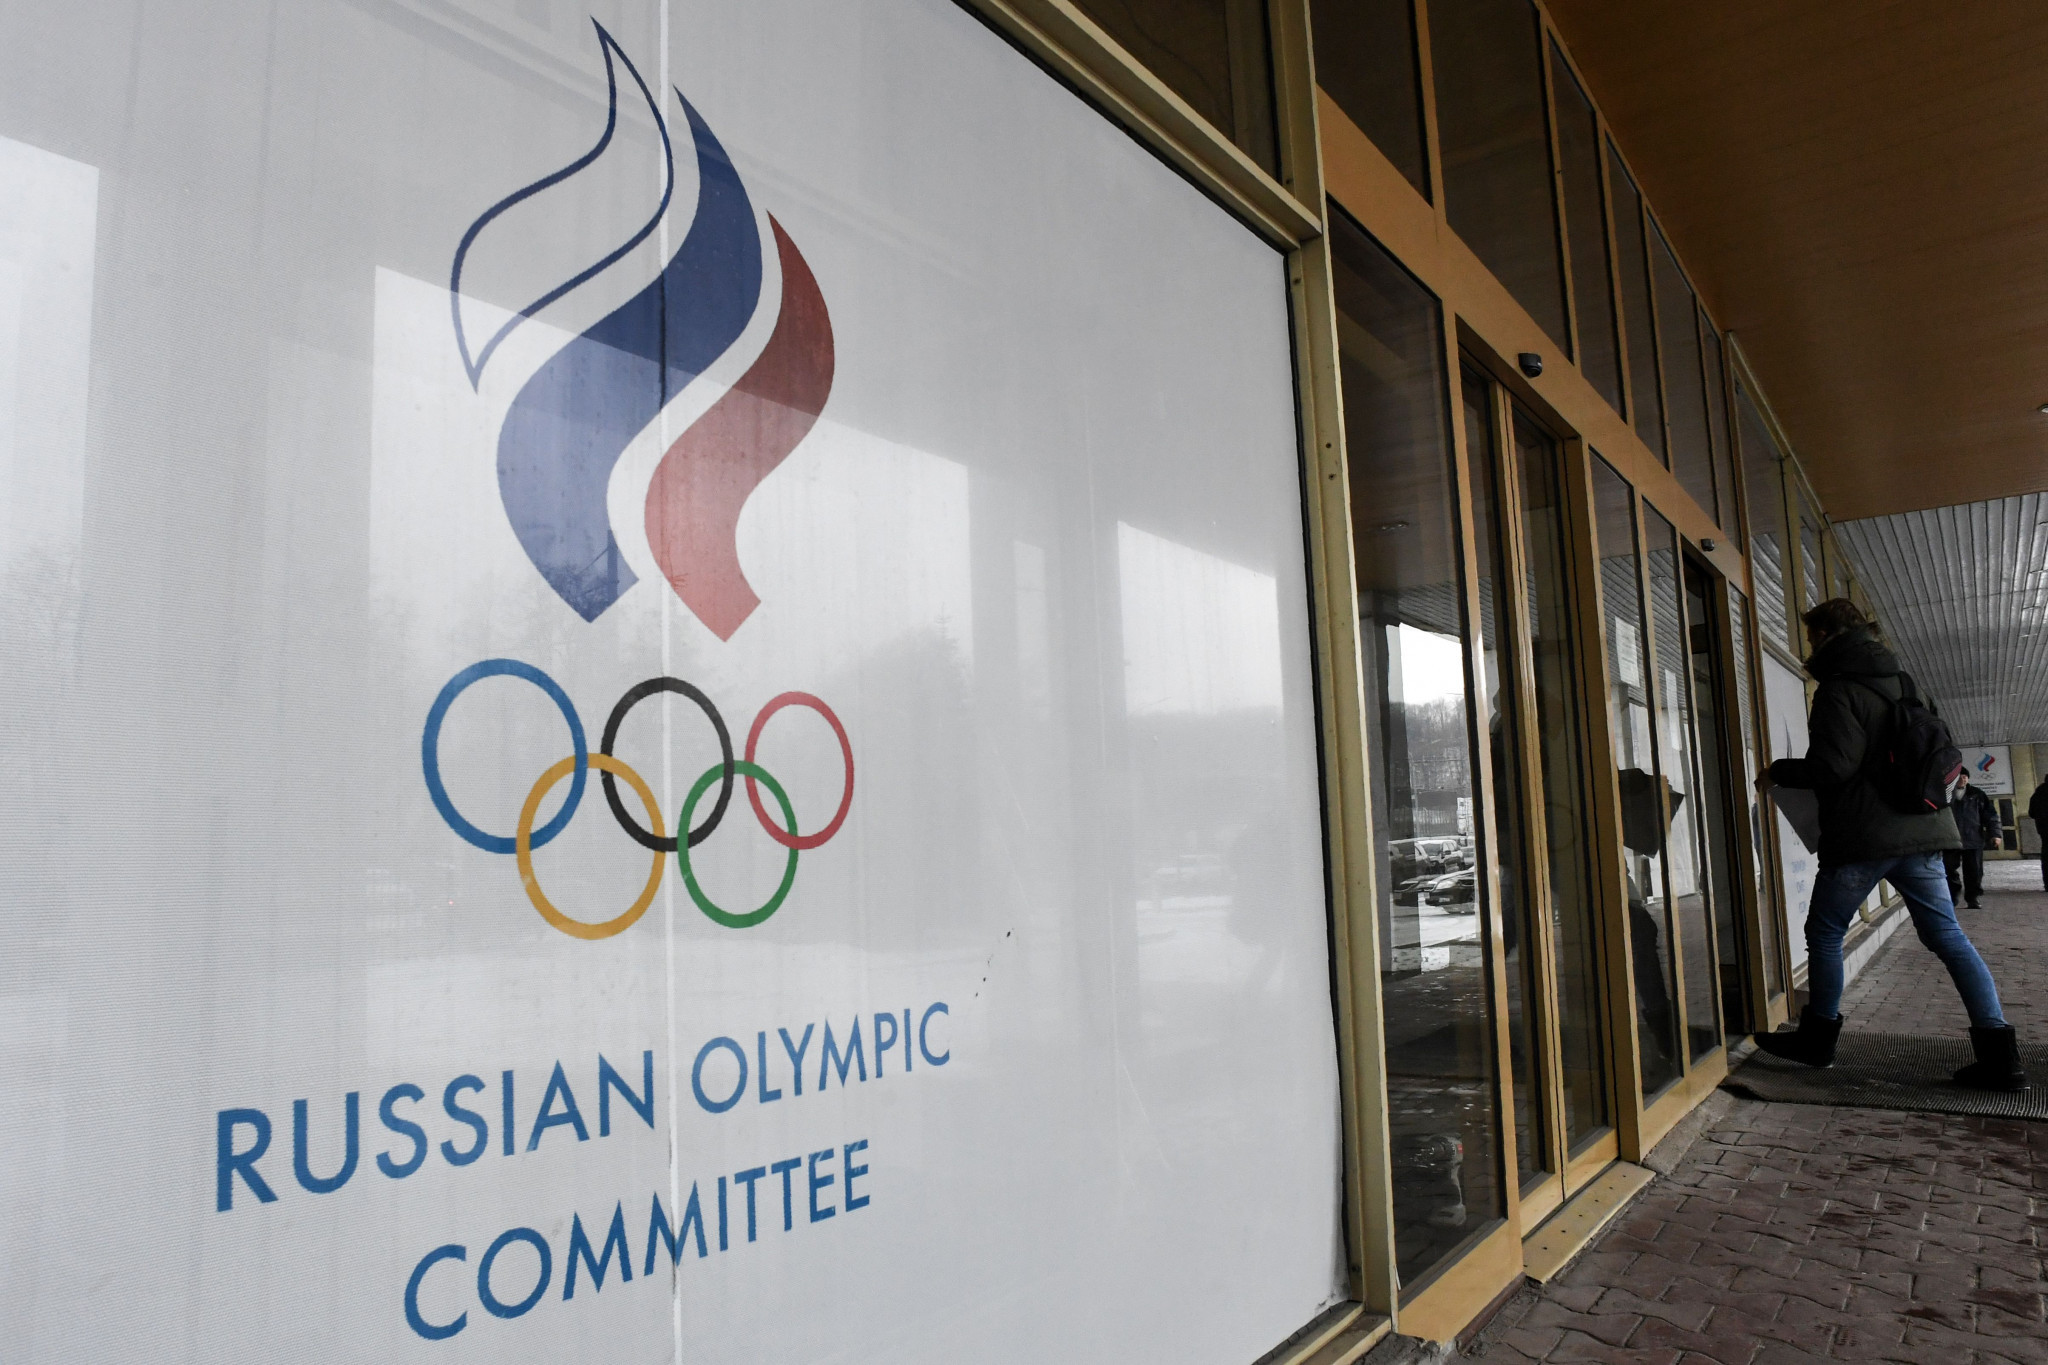 Russian Olympic Committee yet to pay $15 million fine to IOC